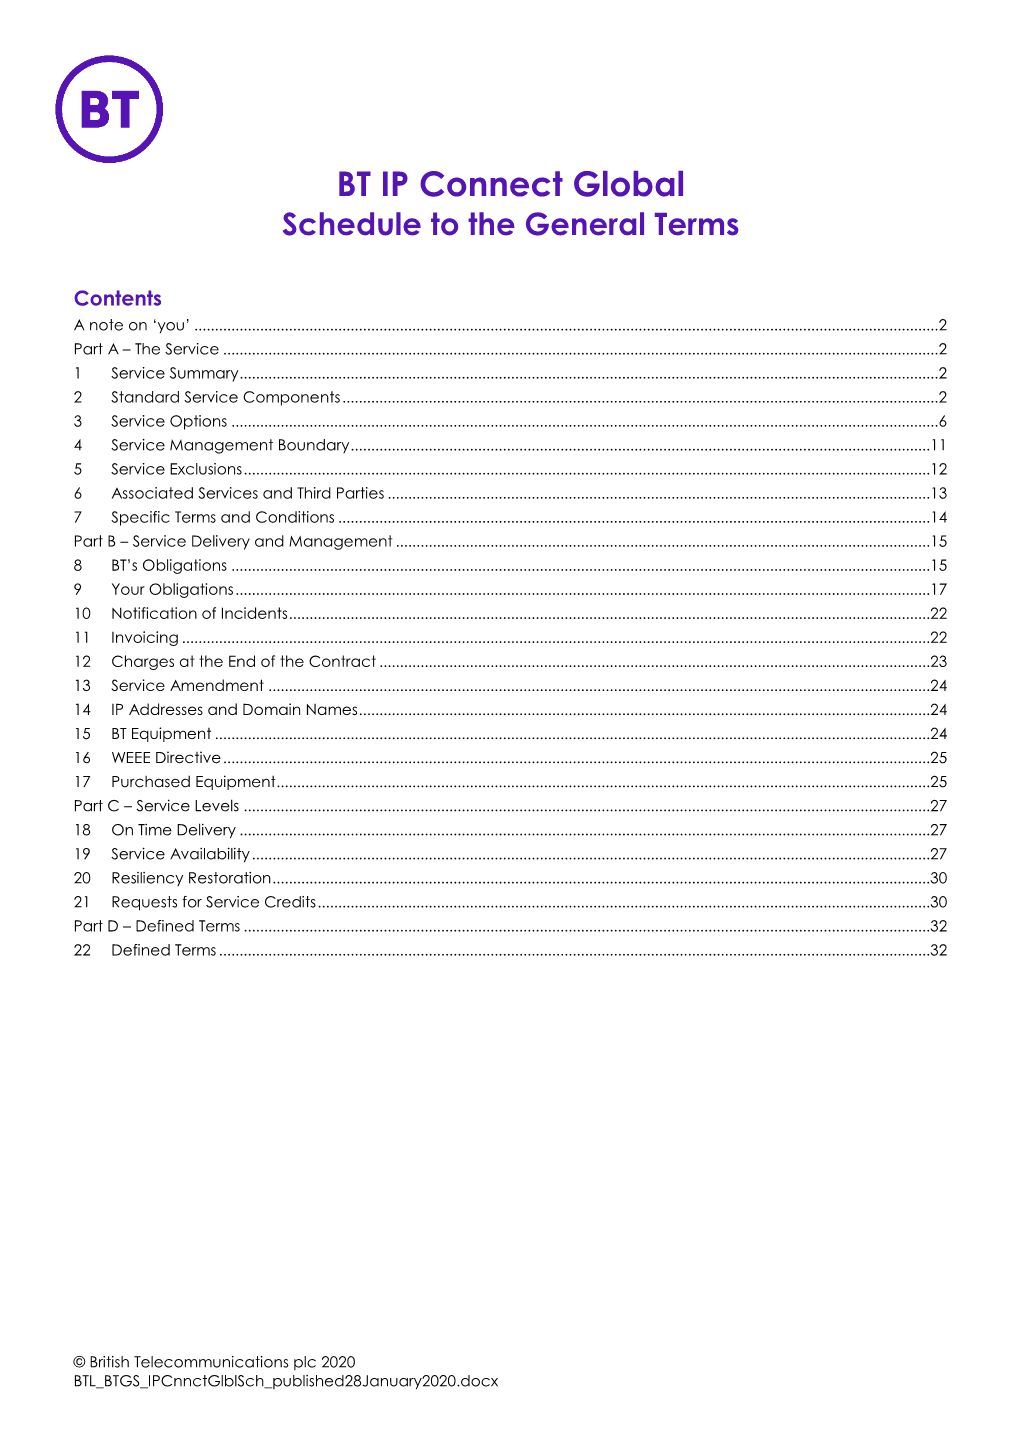 BT IP Connect Global Schedule to the General Terms